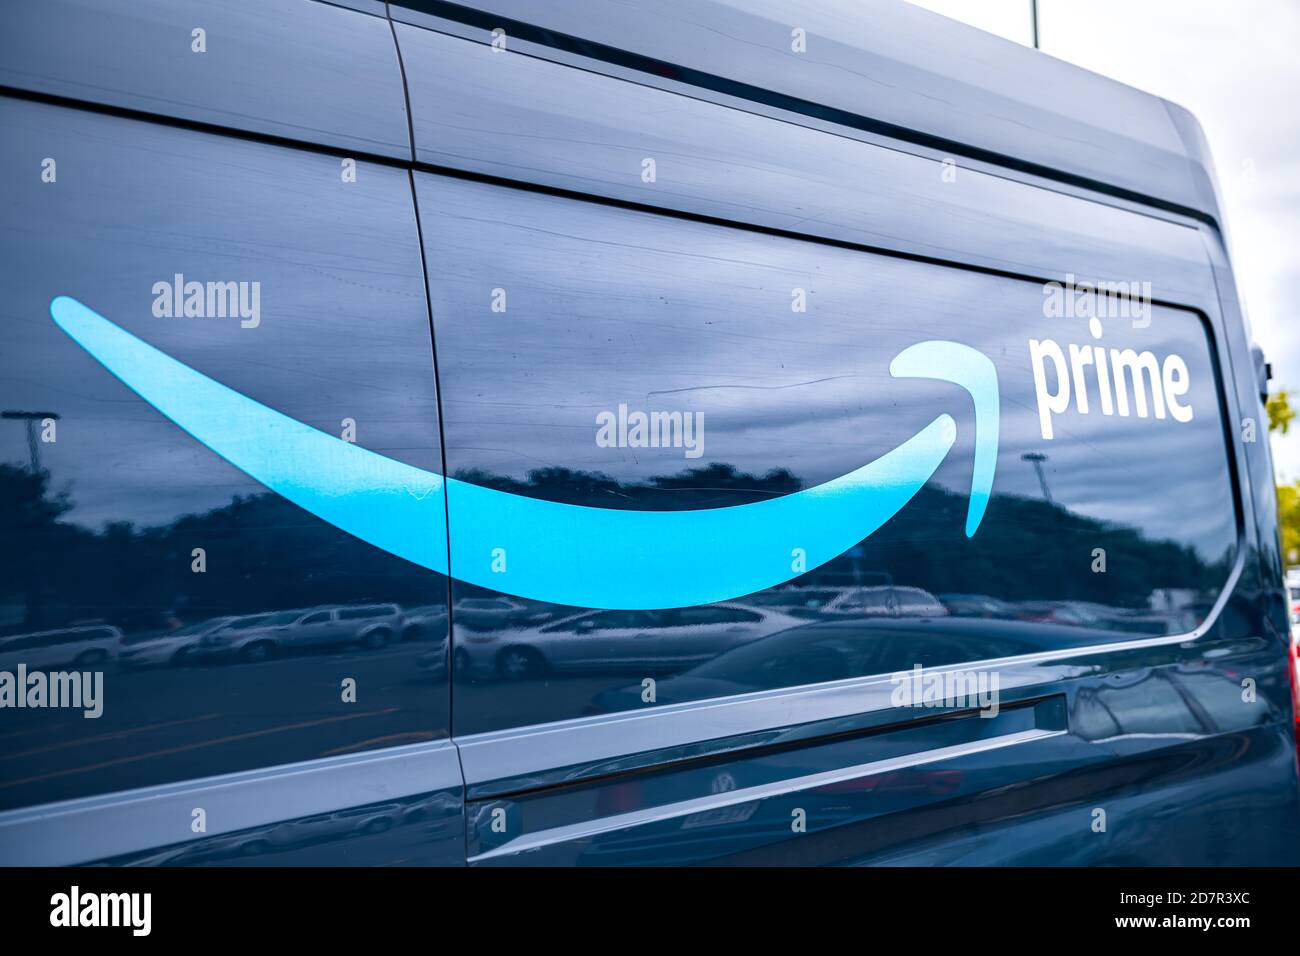 Sterling, USA - September 12, 2020: Amazon delivery van car vehicle parked on parking lot of Walmart retail store with Prime logo on car closeup Stock Photo